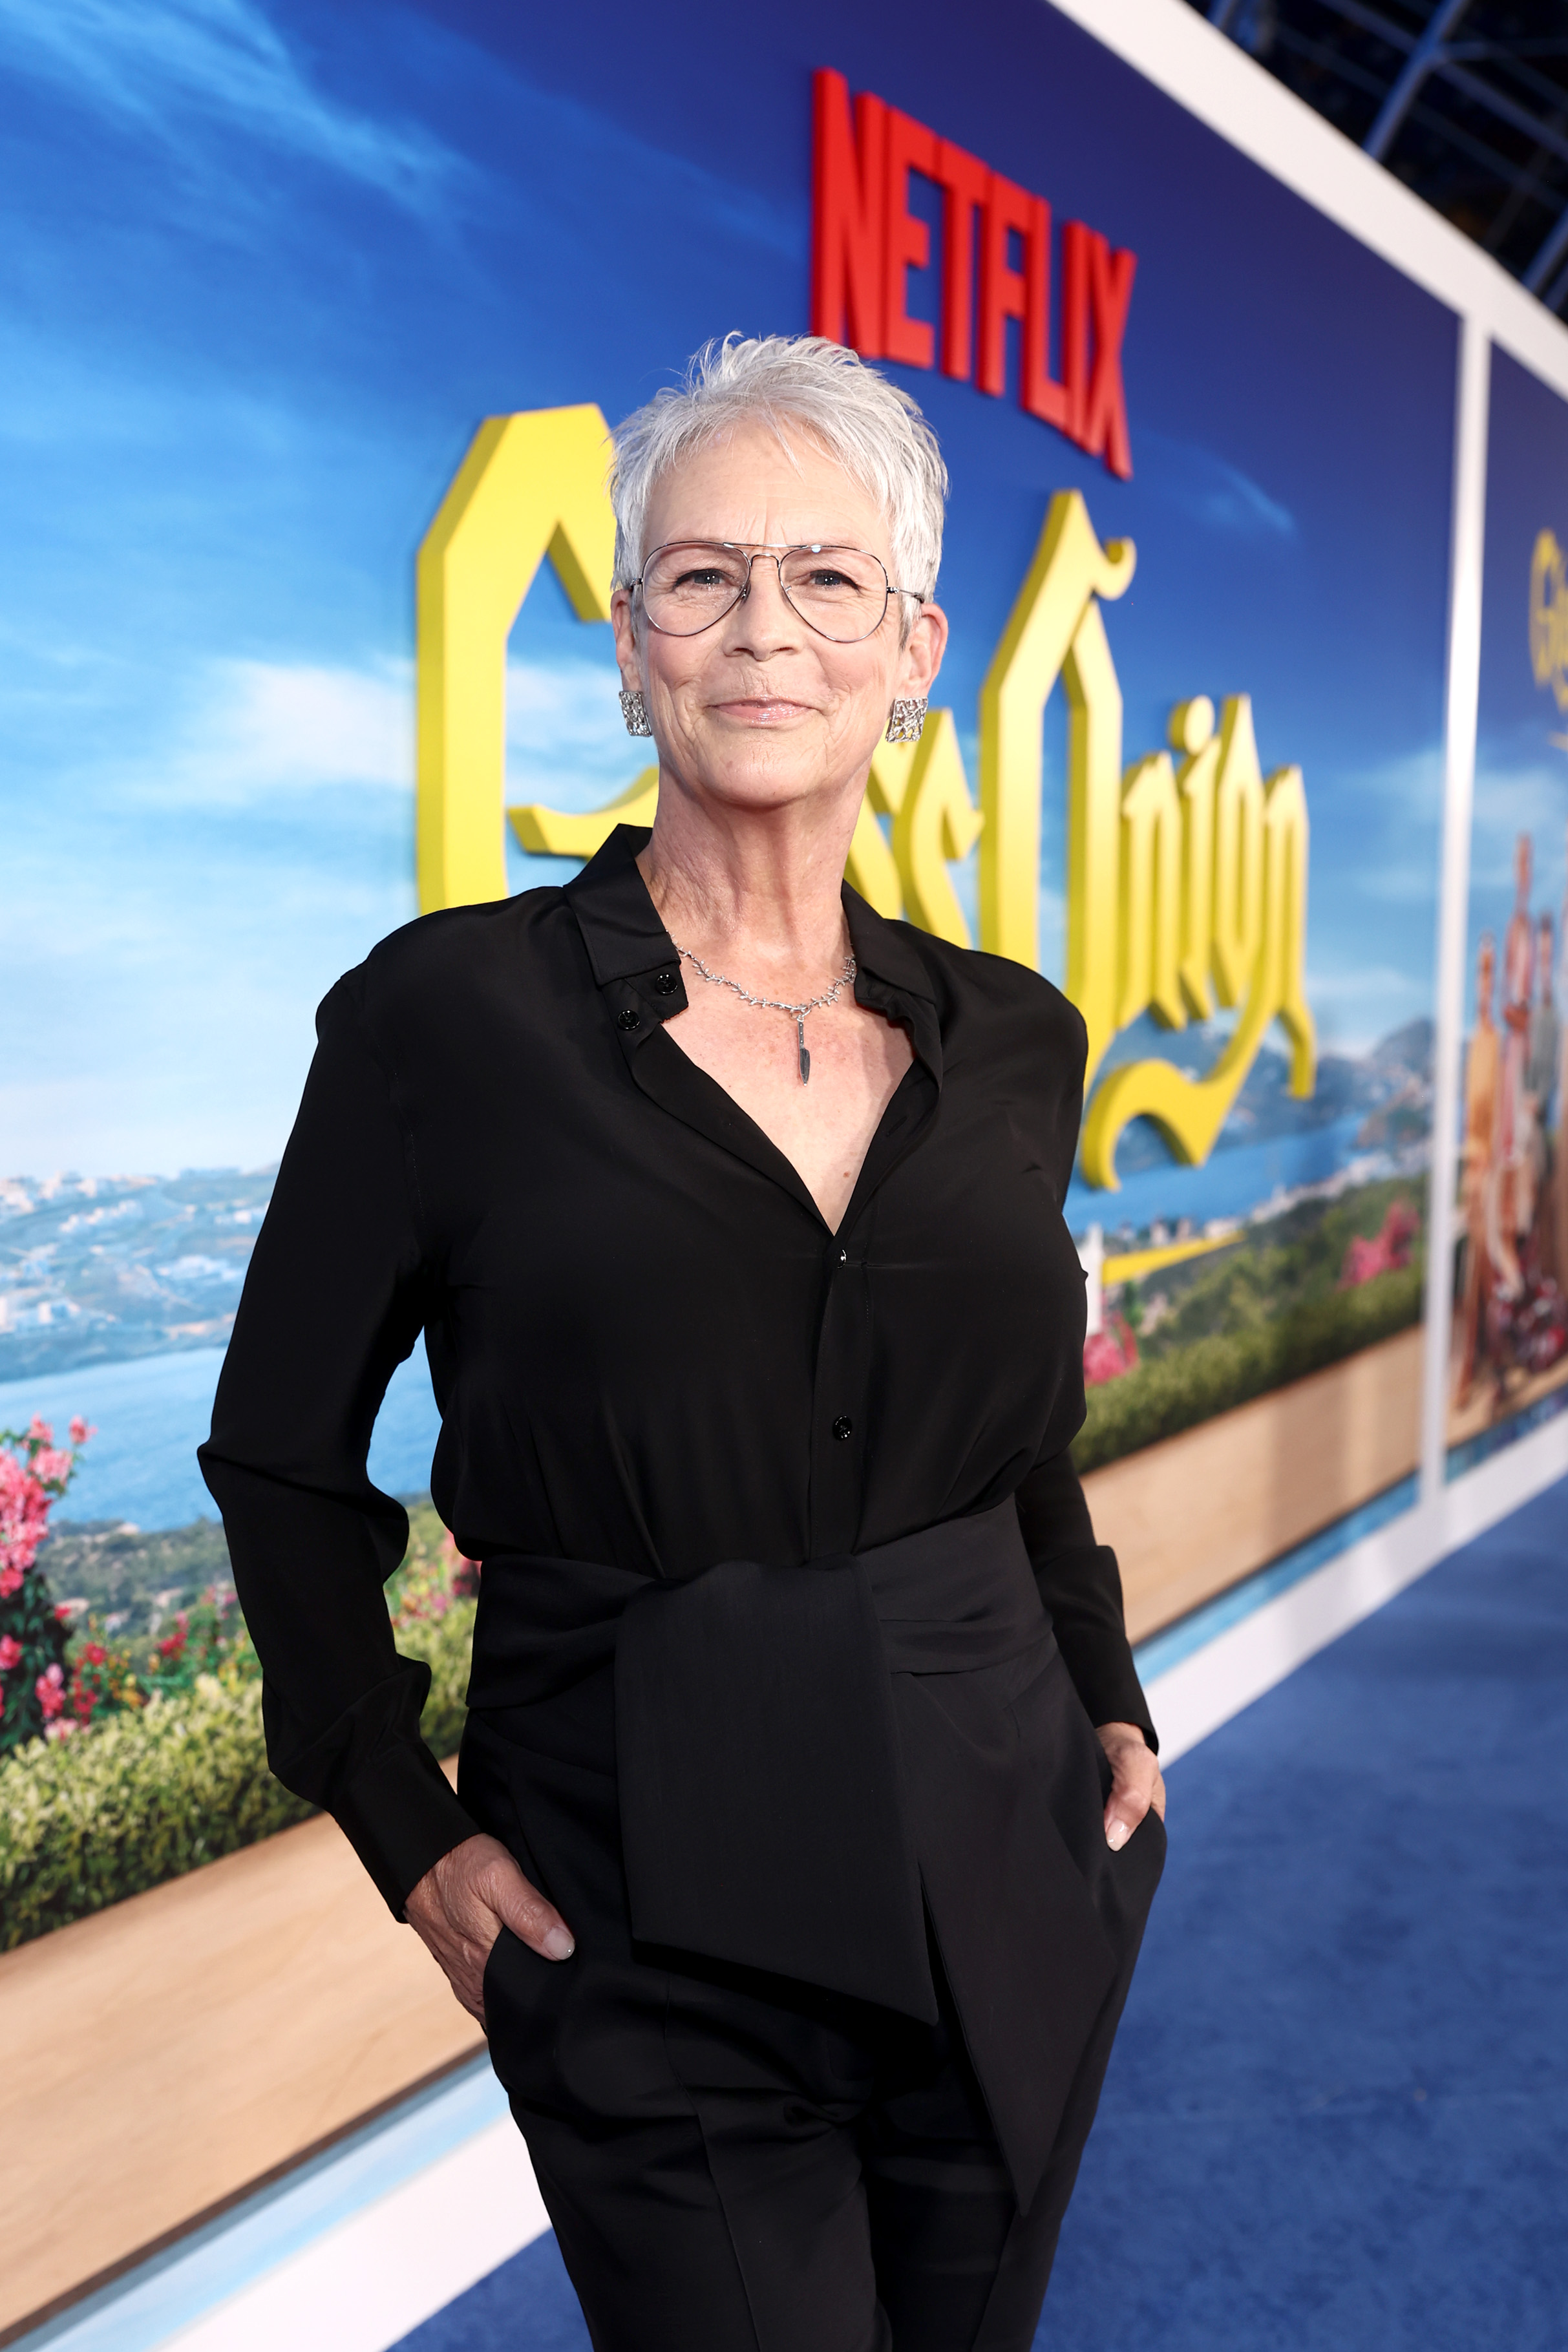 Jamie Lee Curtis attends Netflix's "Glass Onion: A Knives Out Mystery" premiere in Los Angeles, California, on November 14, 2022. | Source: Getty Images